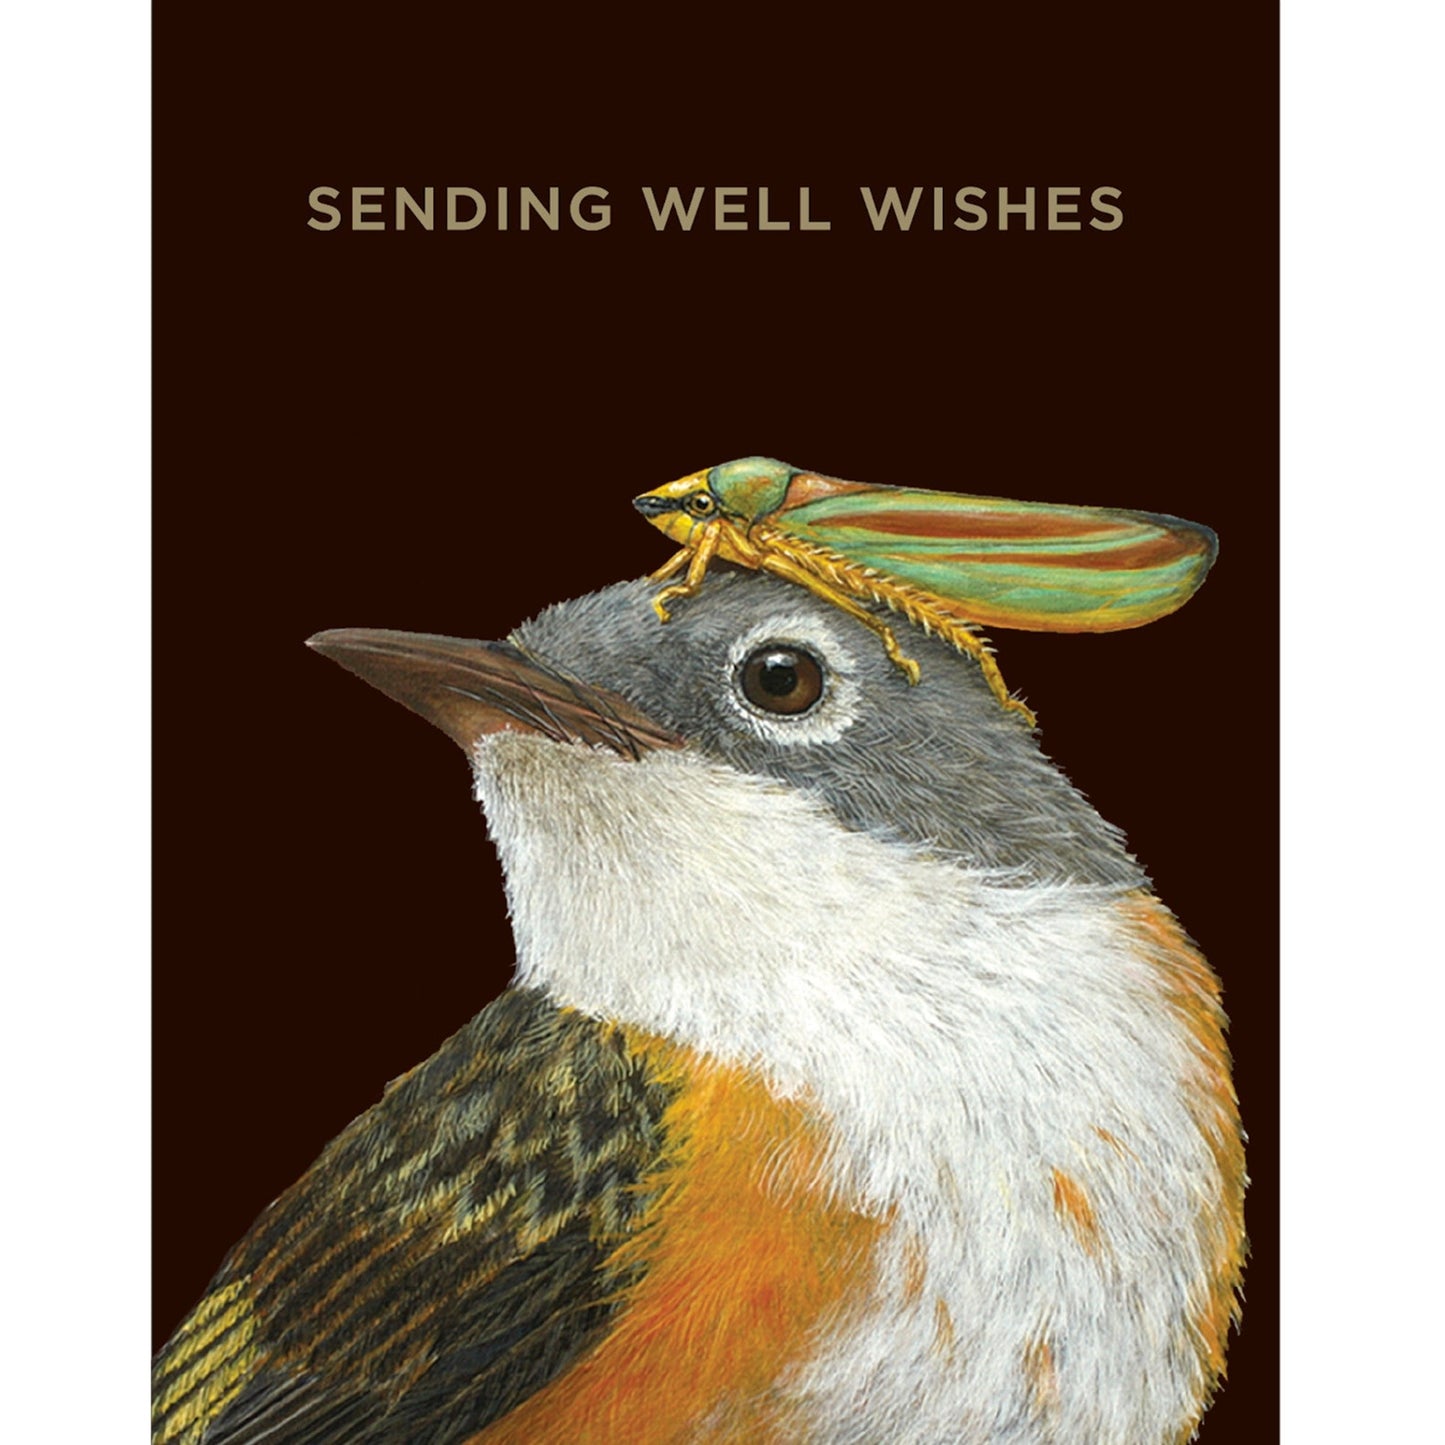 A cute little bird with a katydid on its head. Sending well wishes to all your friends.